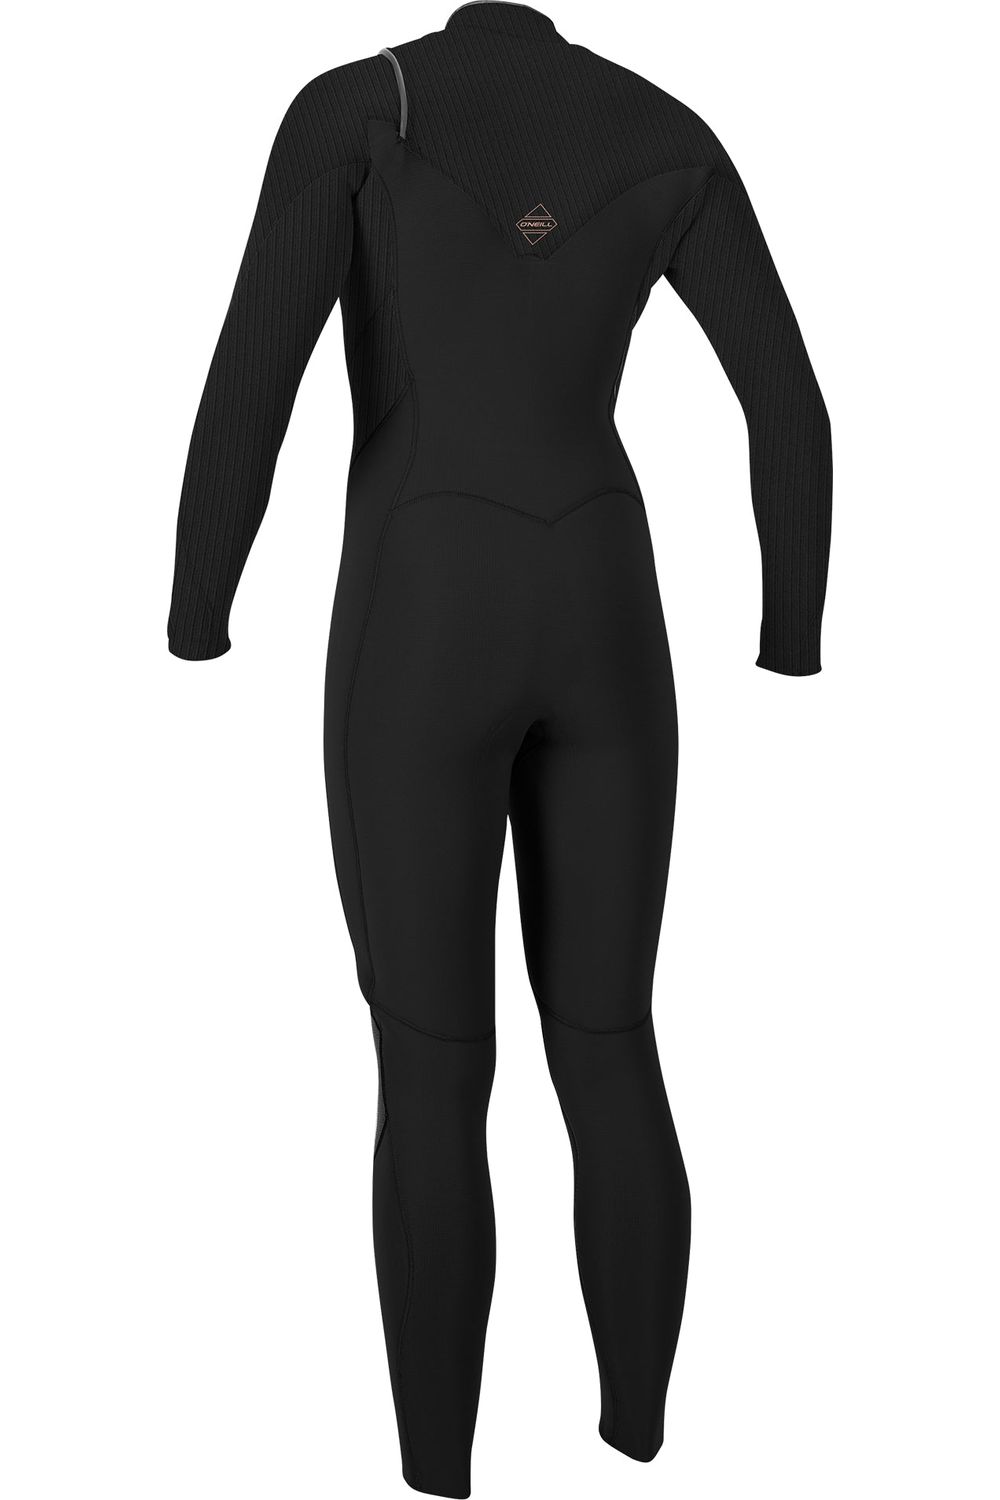 O'neill Hyperfreak Womens Wetsuit from behind in 4/3+